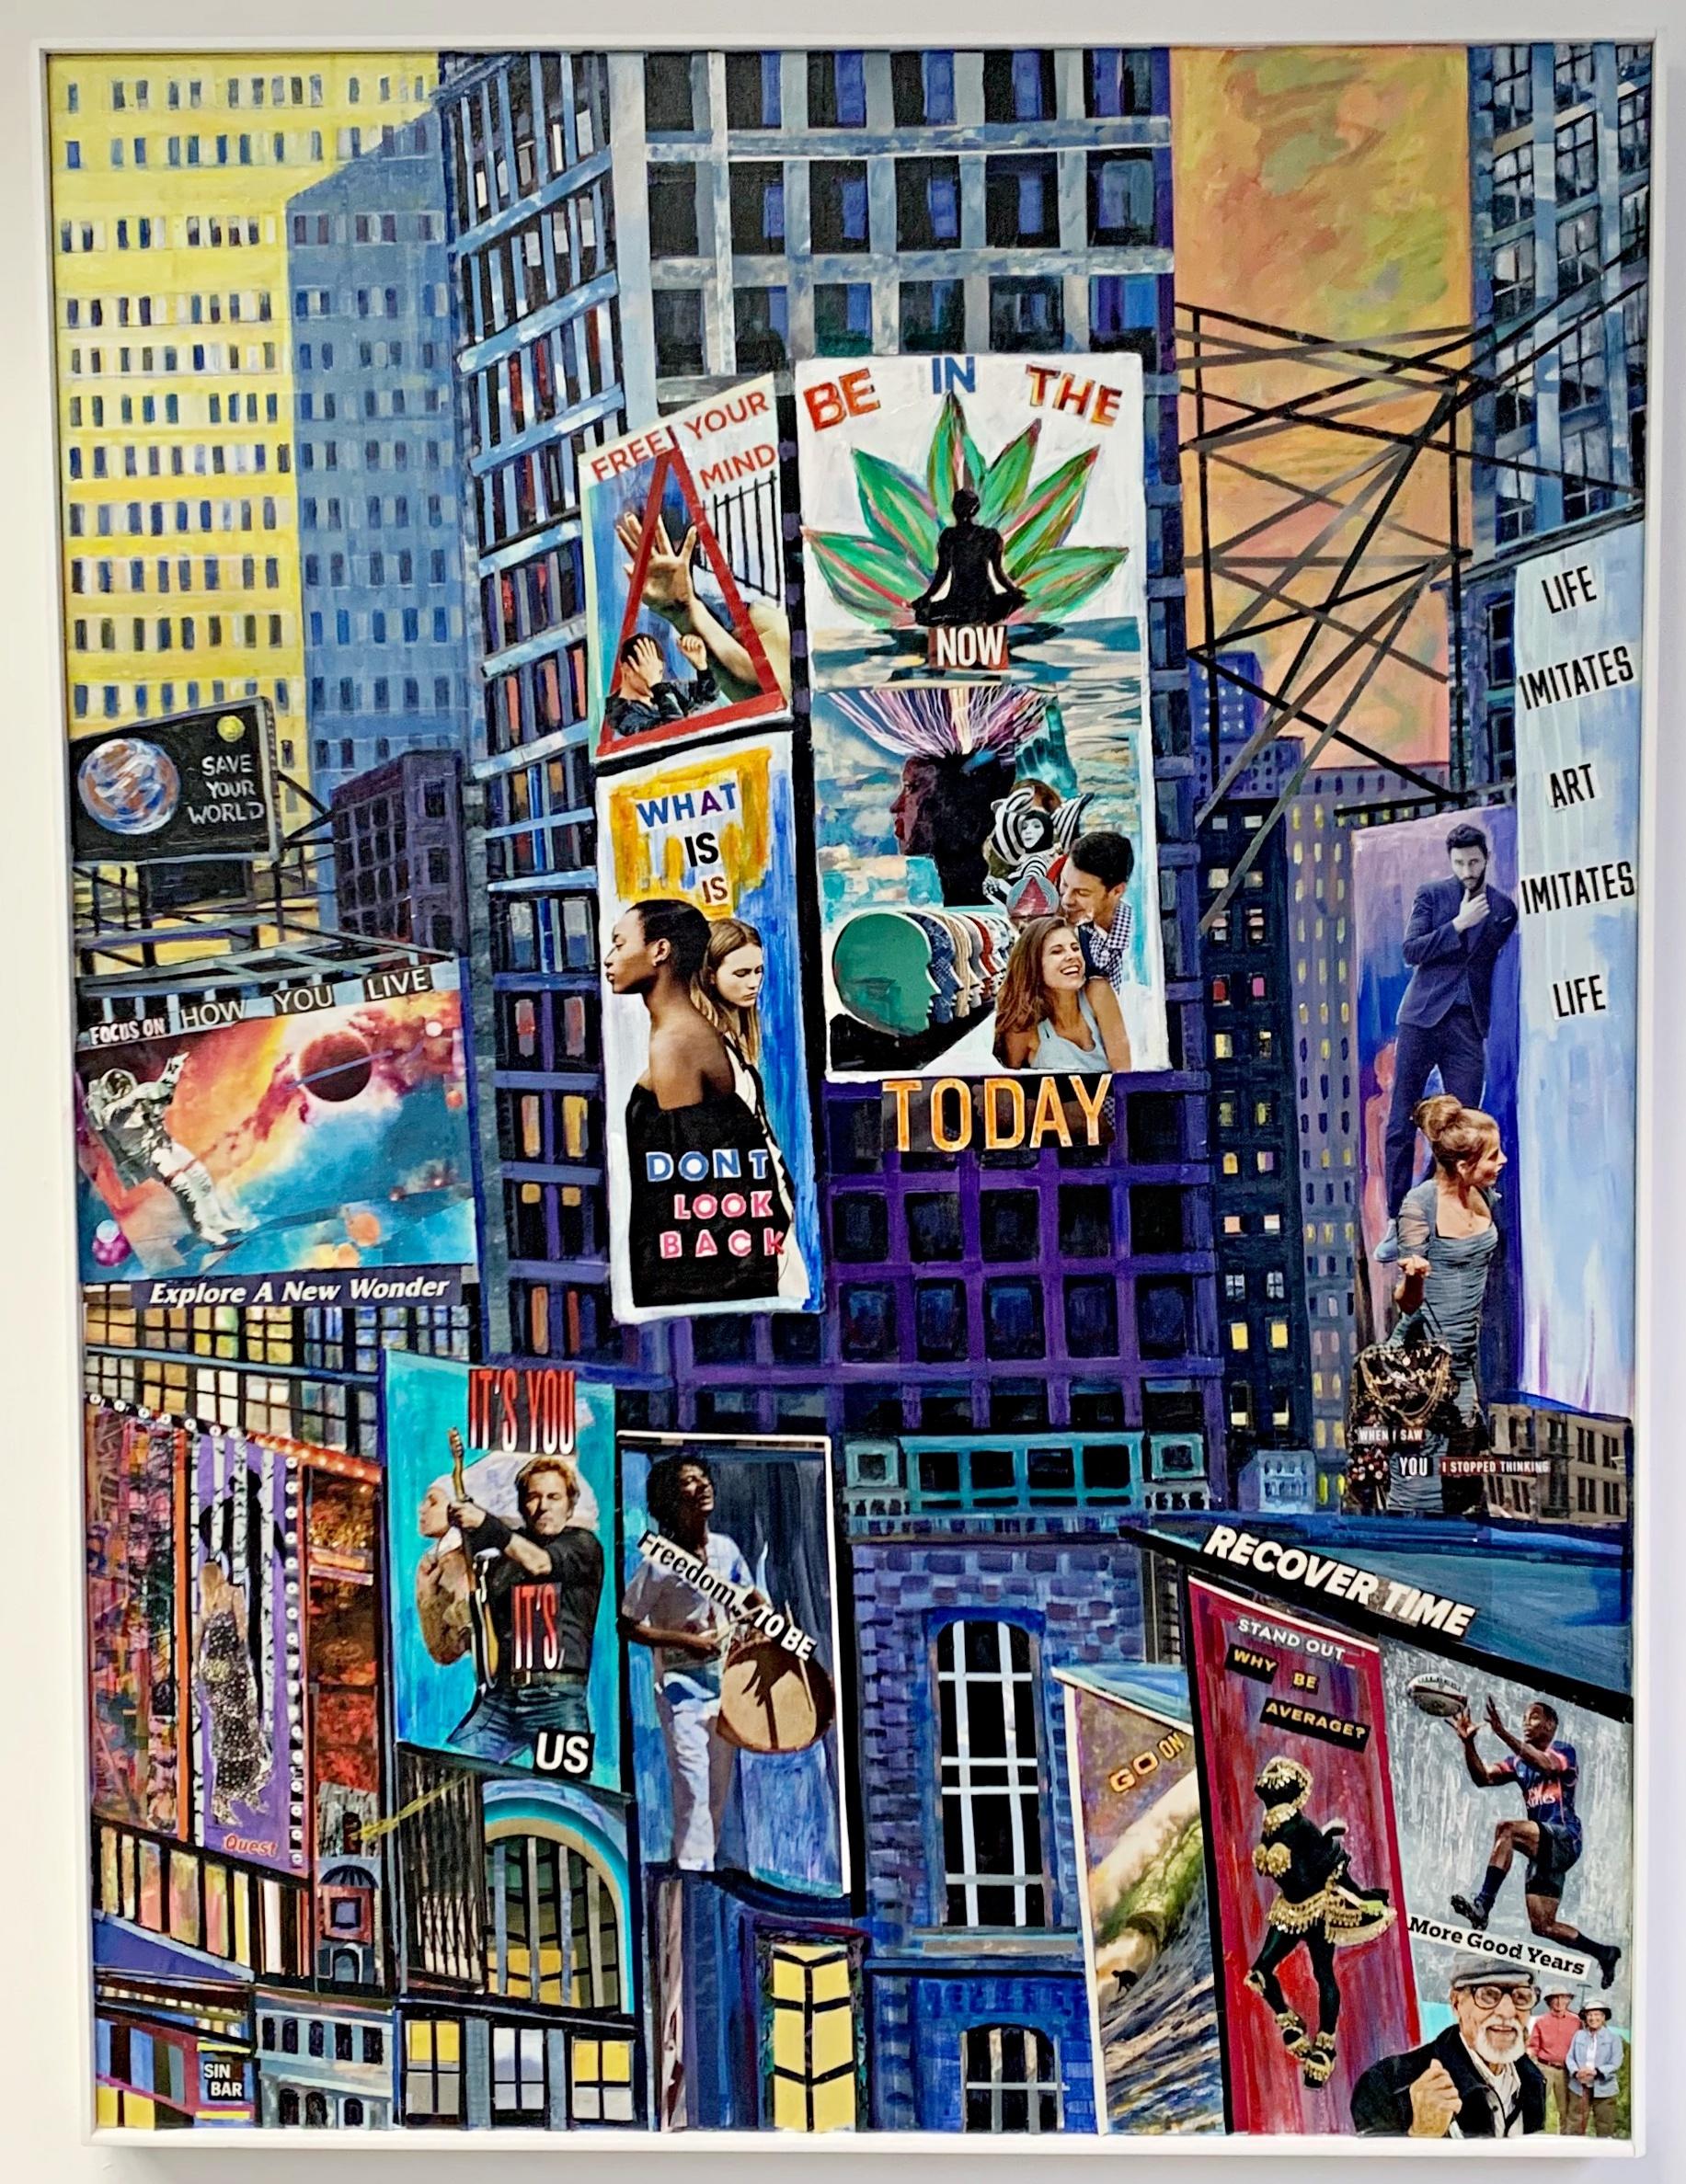 Times Square XI (Recover Time) - Painting by Thelma Appel